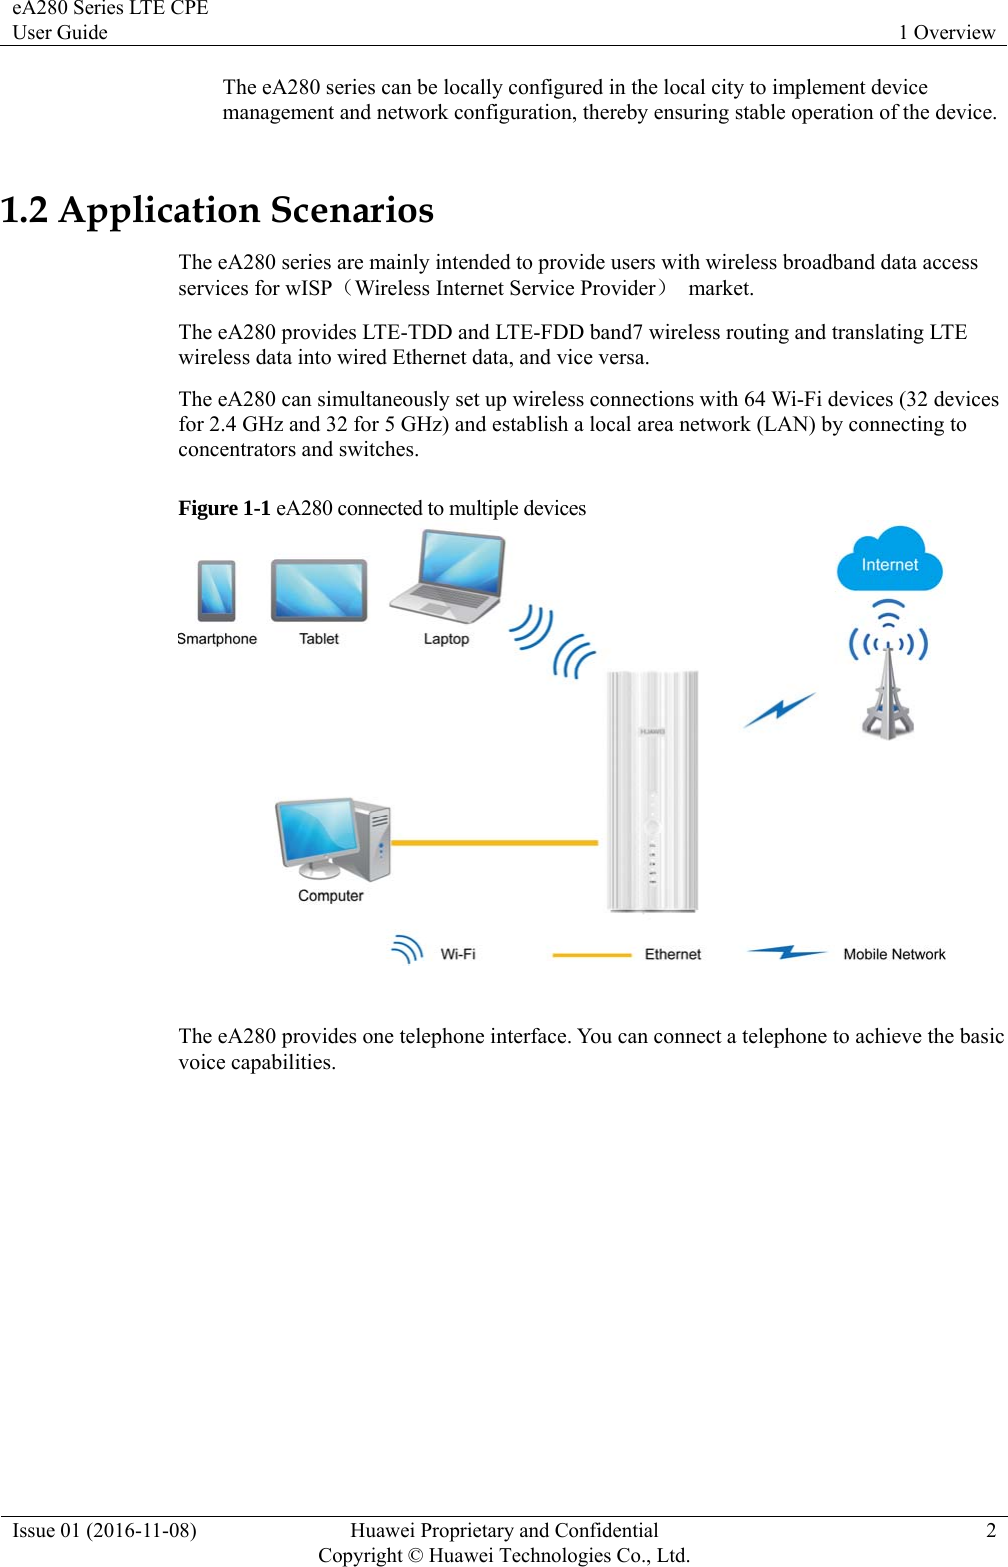 eA280 Series LTE CPE User Guide  1 Overview Issue 01 (2016-11-08)  Huawei Proprietary and Confidential         Copyright © Huawei Technologies Co., Ltd.2 The eA280 series can be locally configured in the local city to implement device management and network configuration, thereby ensuring stable operation of the device. 1.2 Application Scenarios The eA280 series are mainly intended to provide users with wireless broadband data access services for wISP（Wireless Internet Service Provider） market. The eA280 provides LTE-TDD and LTE-FDD band7 wireless routing and translating LTE wireless data into wired Ethernet data, and vice versa. The eA280 can simultaneously set up wireless connections with 64 Wi-Fi devices (32 devices for 2.4 GHz and 32 for 5 GHz) and establish a local area network (LAN) by connecting to concentrators and switches. Figure 1-1 eA280 connected to multiple devices   The eA280 provides one telephone interface. You can connect a telephone to achieve the basic voice capabilities. 